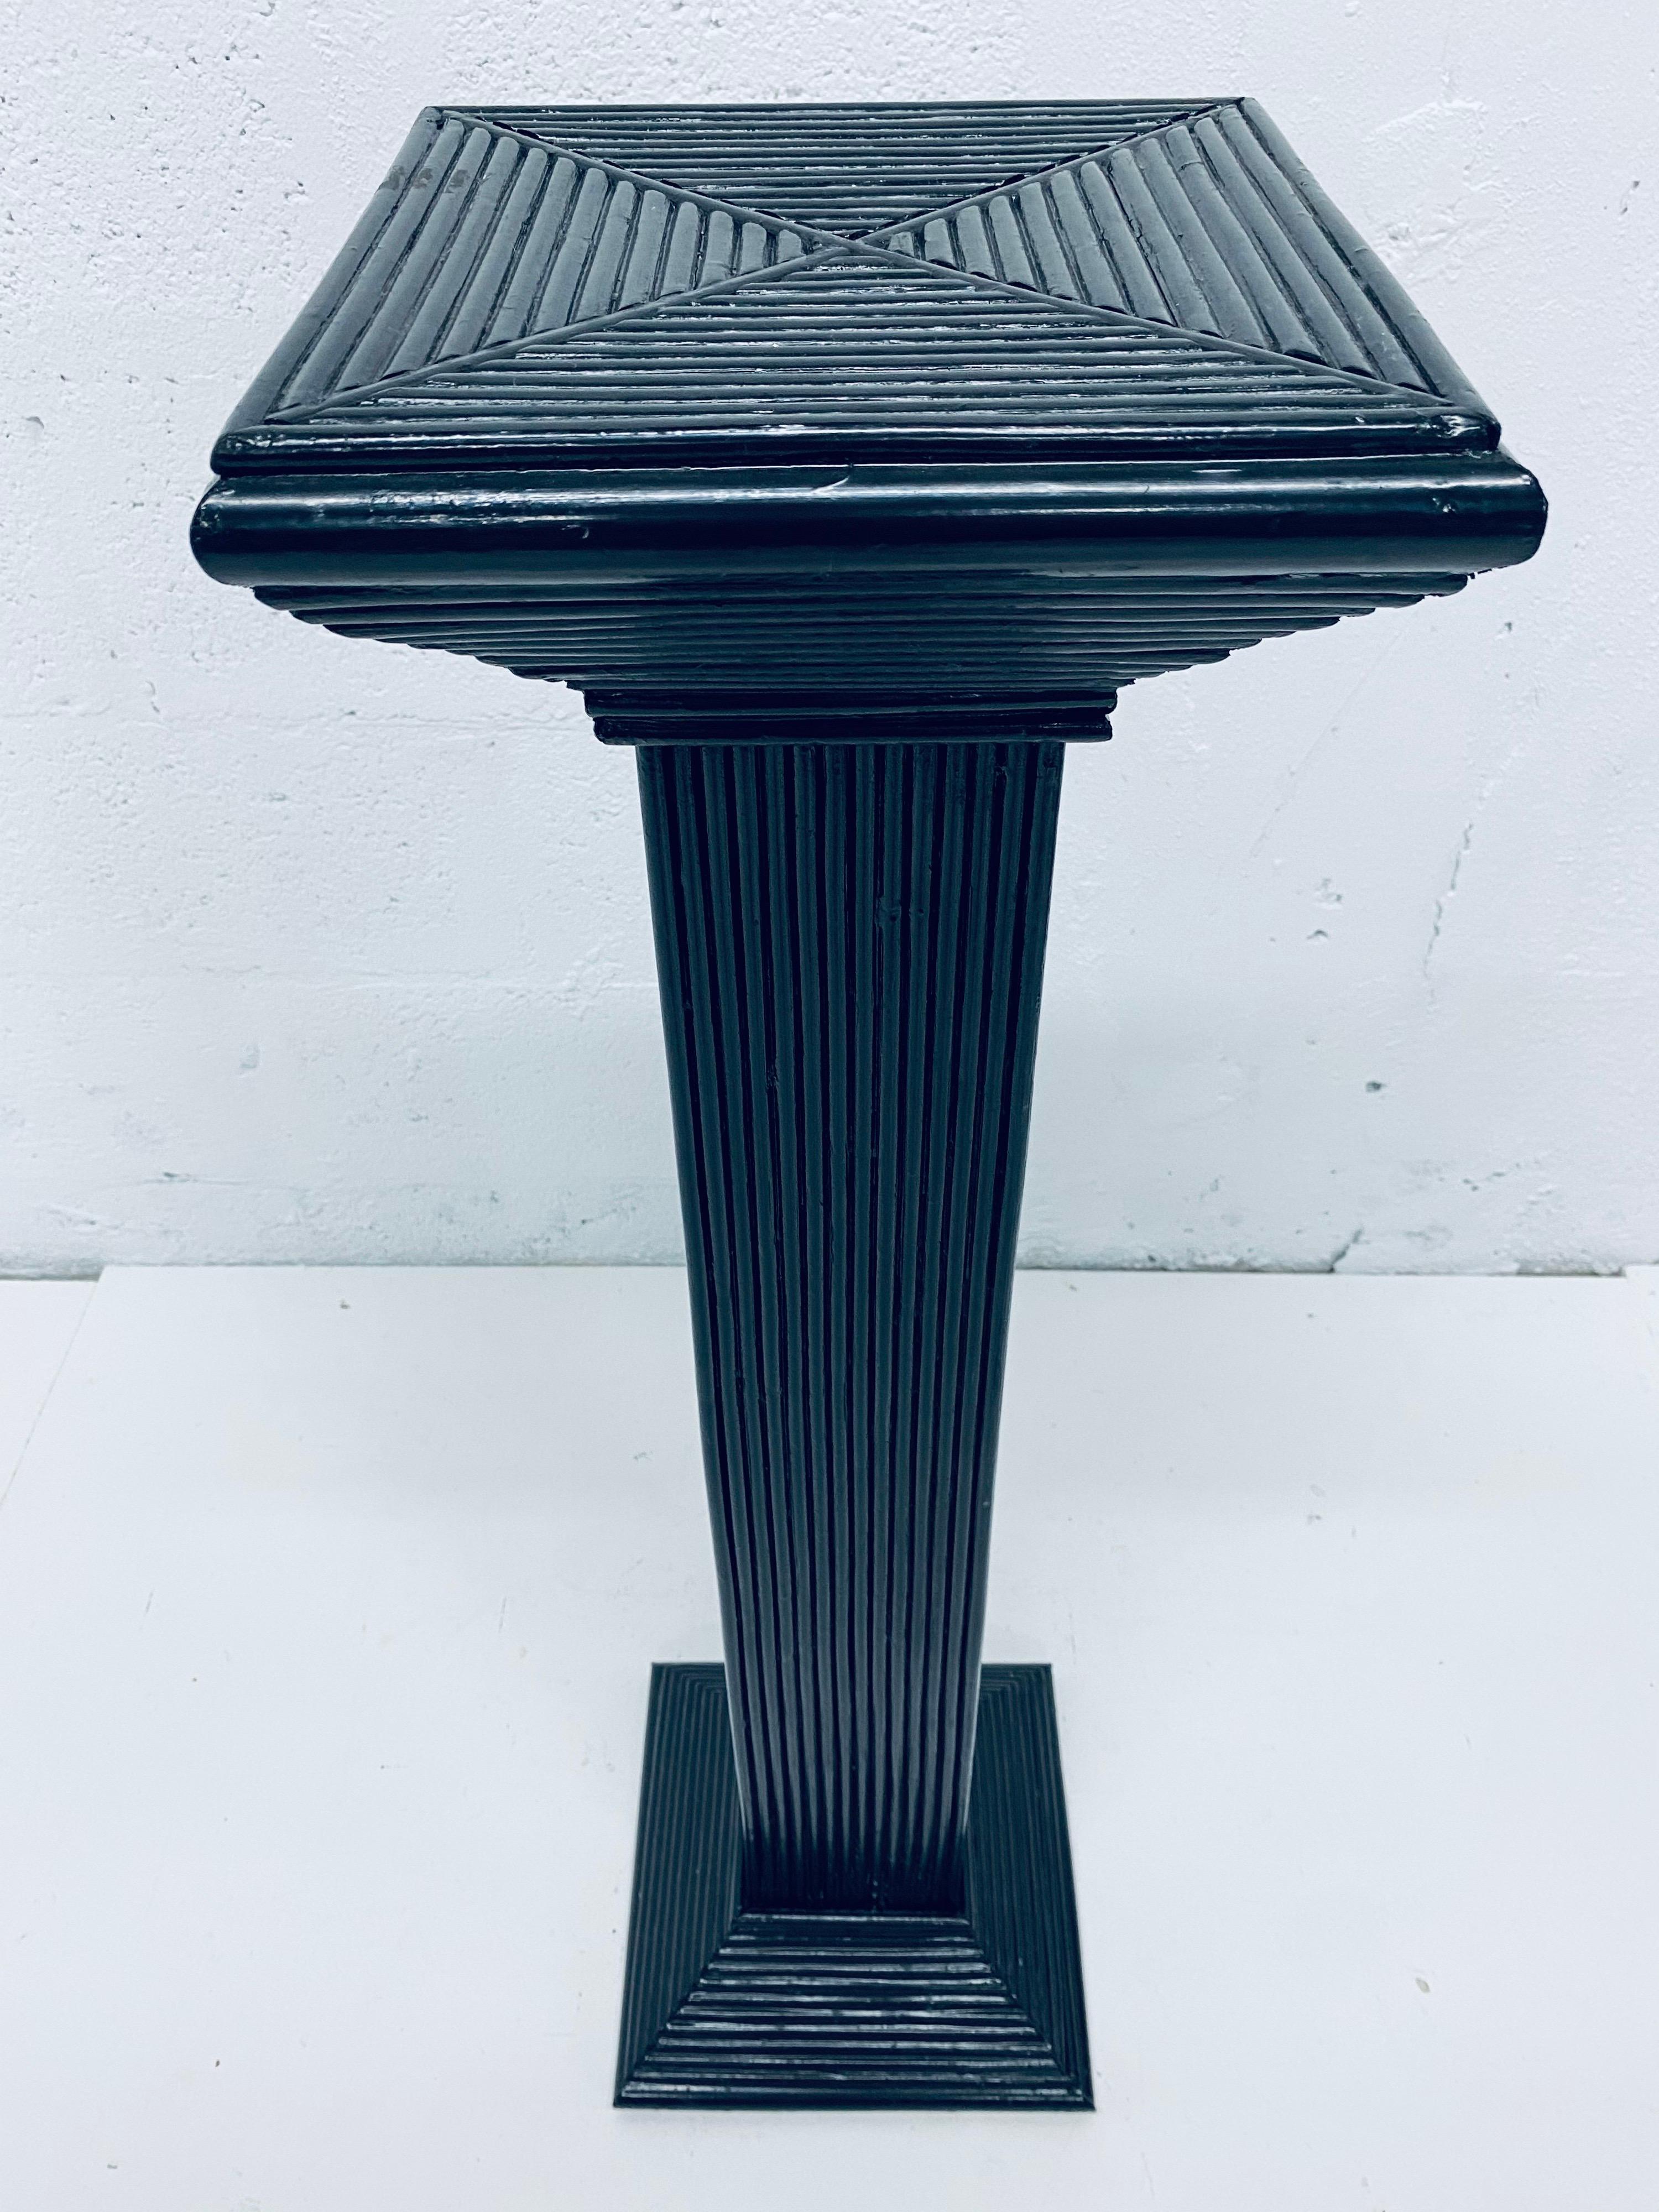 Black lacquered pencil reed rattan pedestal column table from the 1960s.

Surface dimensions: W9-1/2